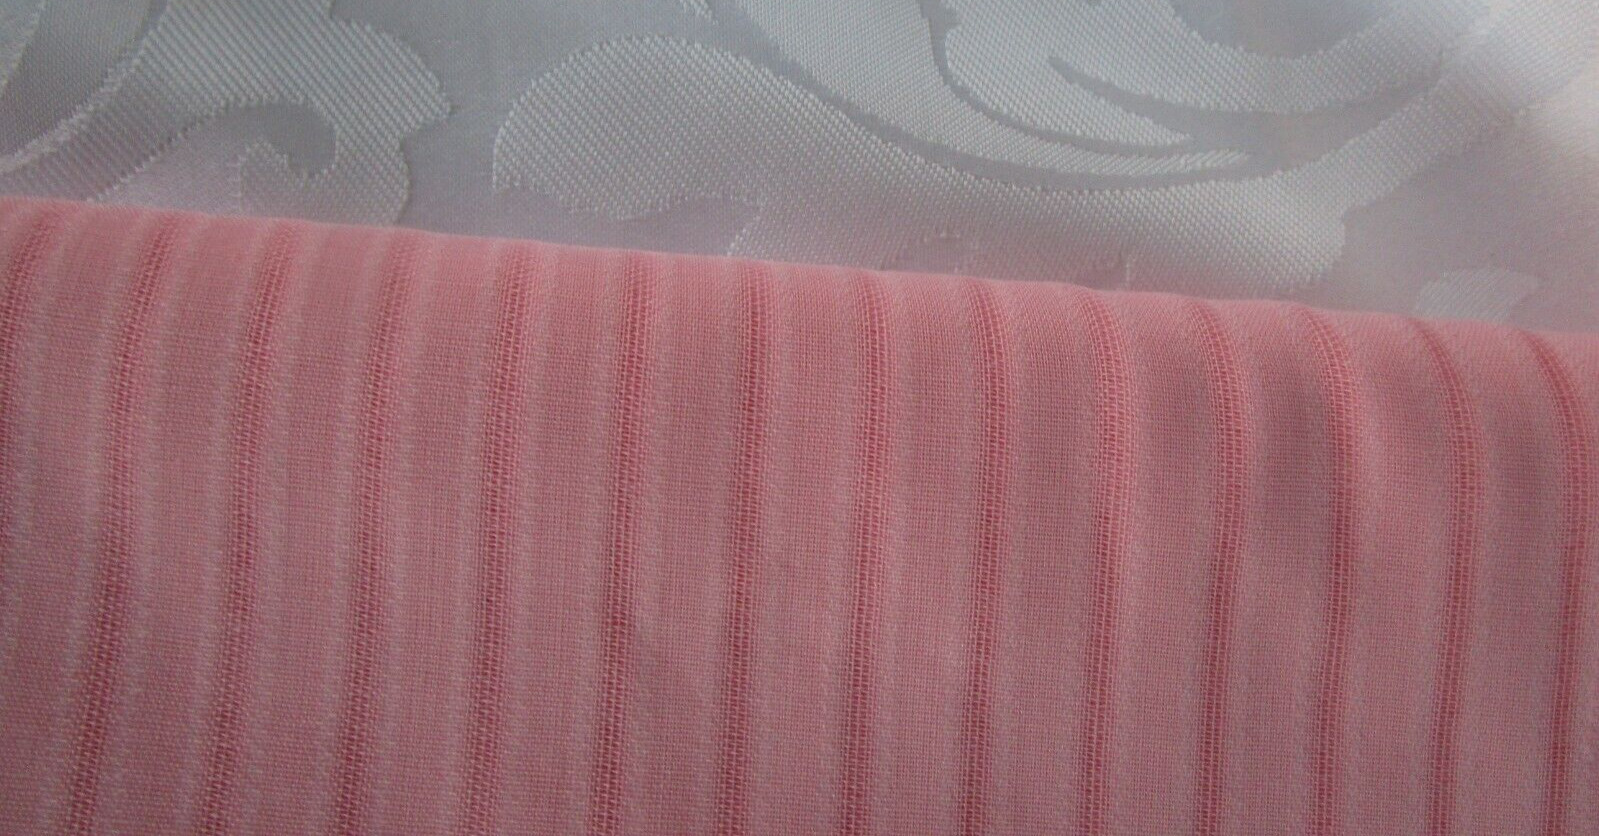 Vintage Open Weave Dimity Fabric, 5 YDS,  RICH PEACHY PINK, GORGEOUS